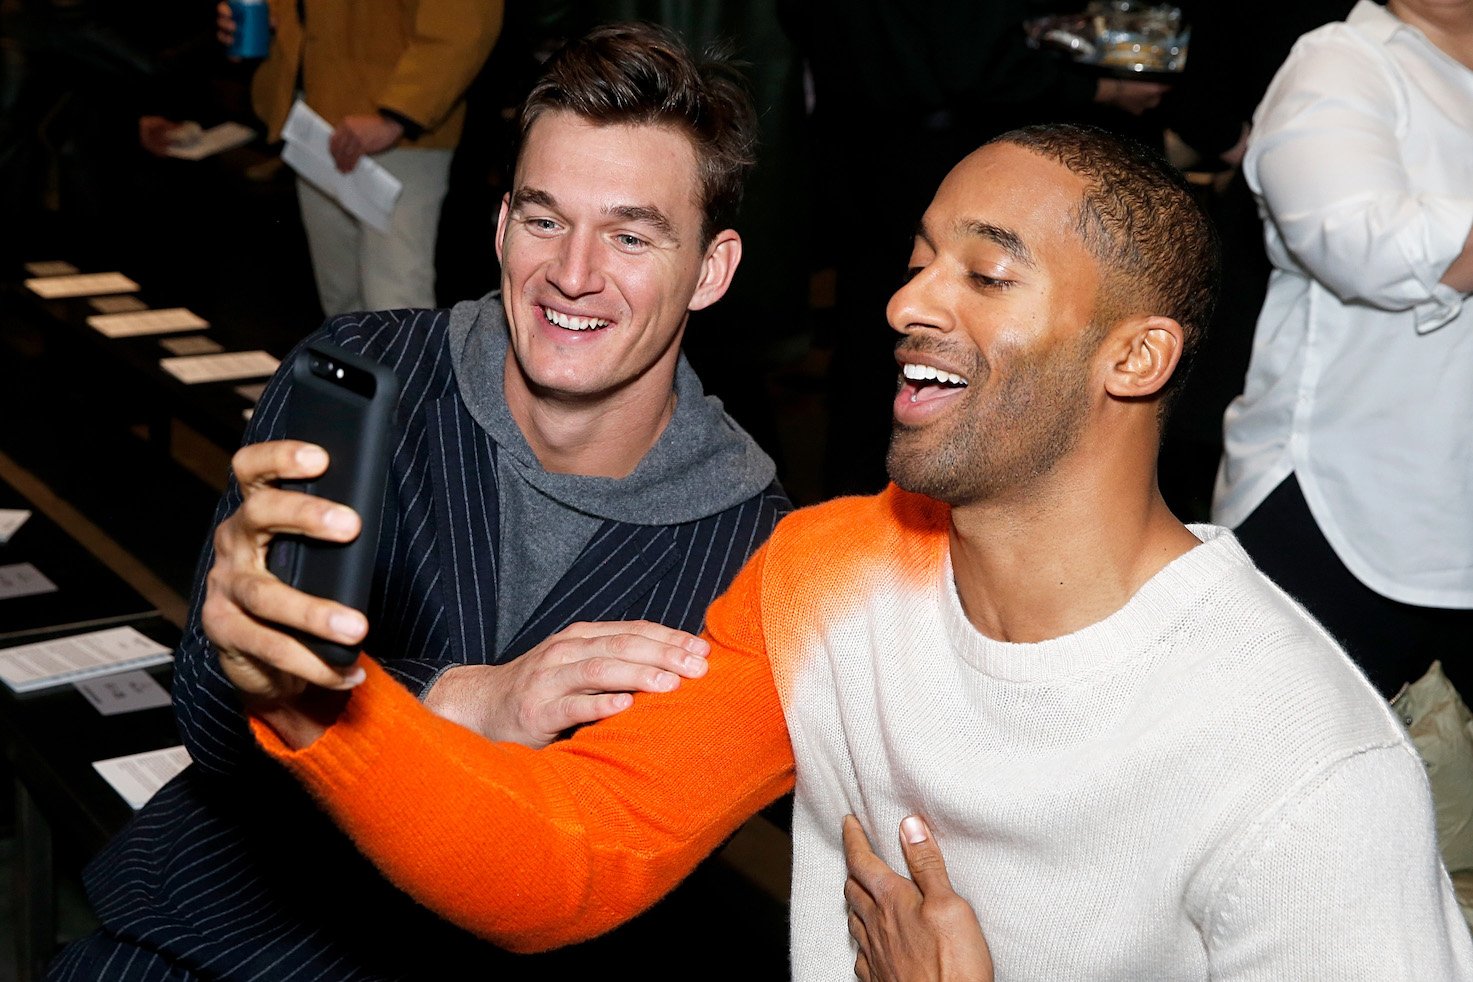 Tyler Cameron from 'The Bachelorette' and Matt James from 'The Bachelor' taking a selfie together